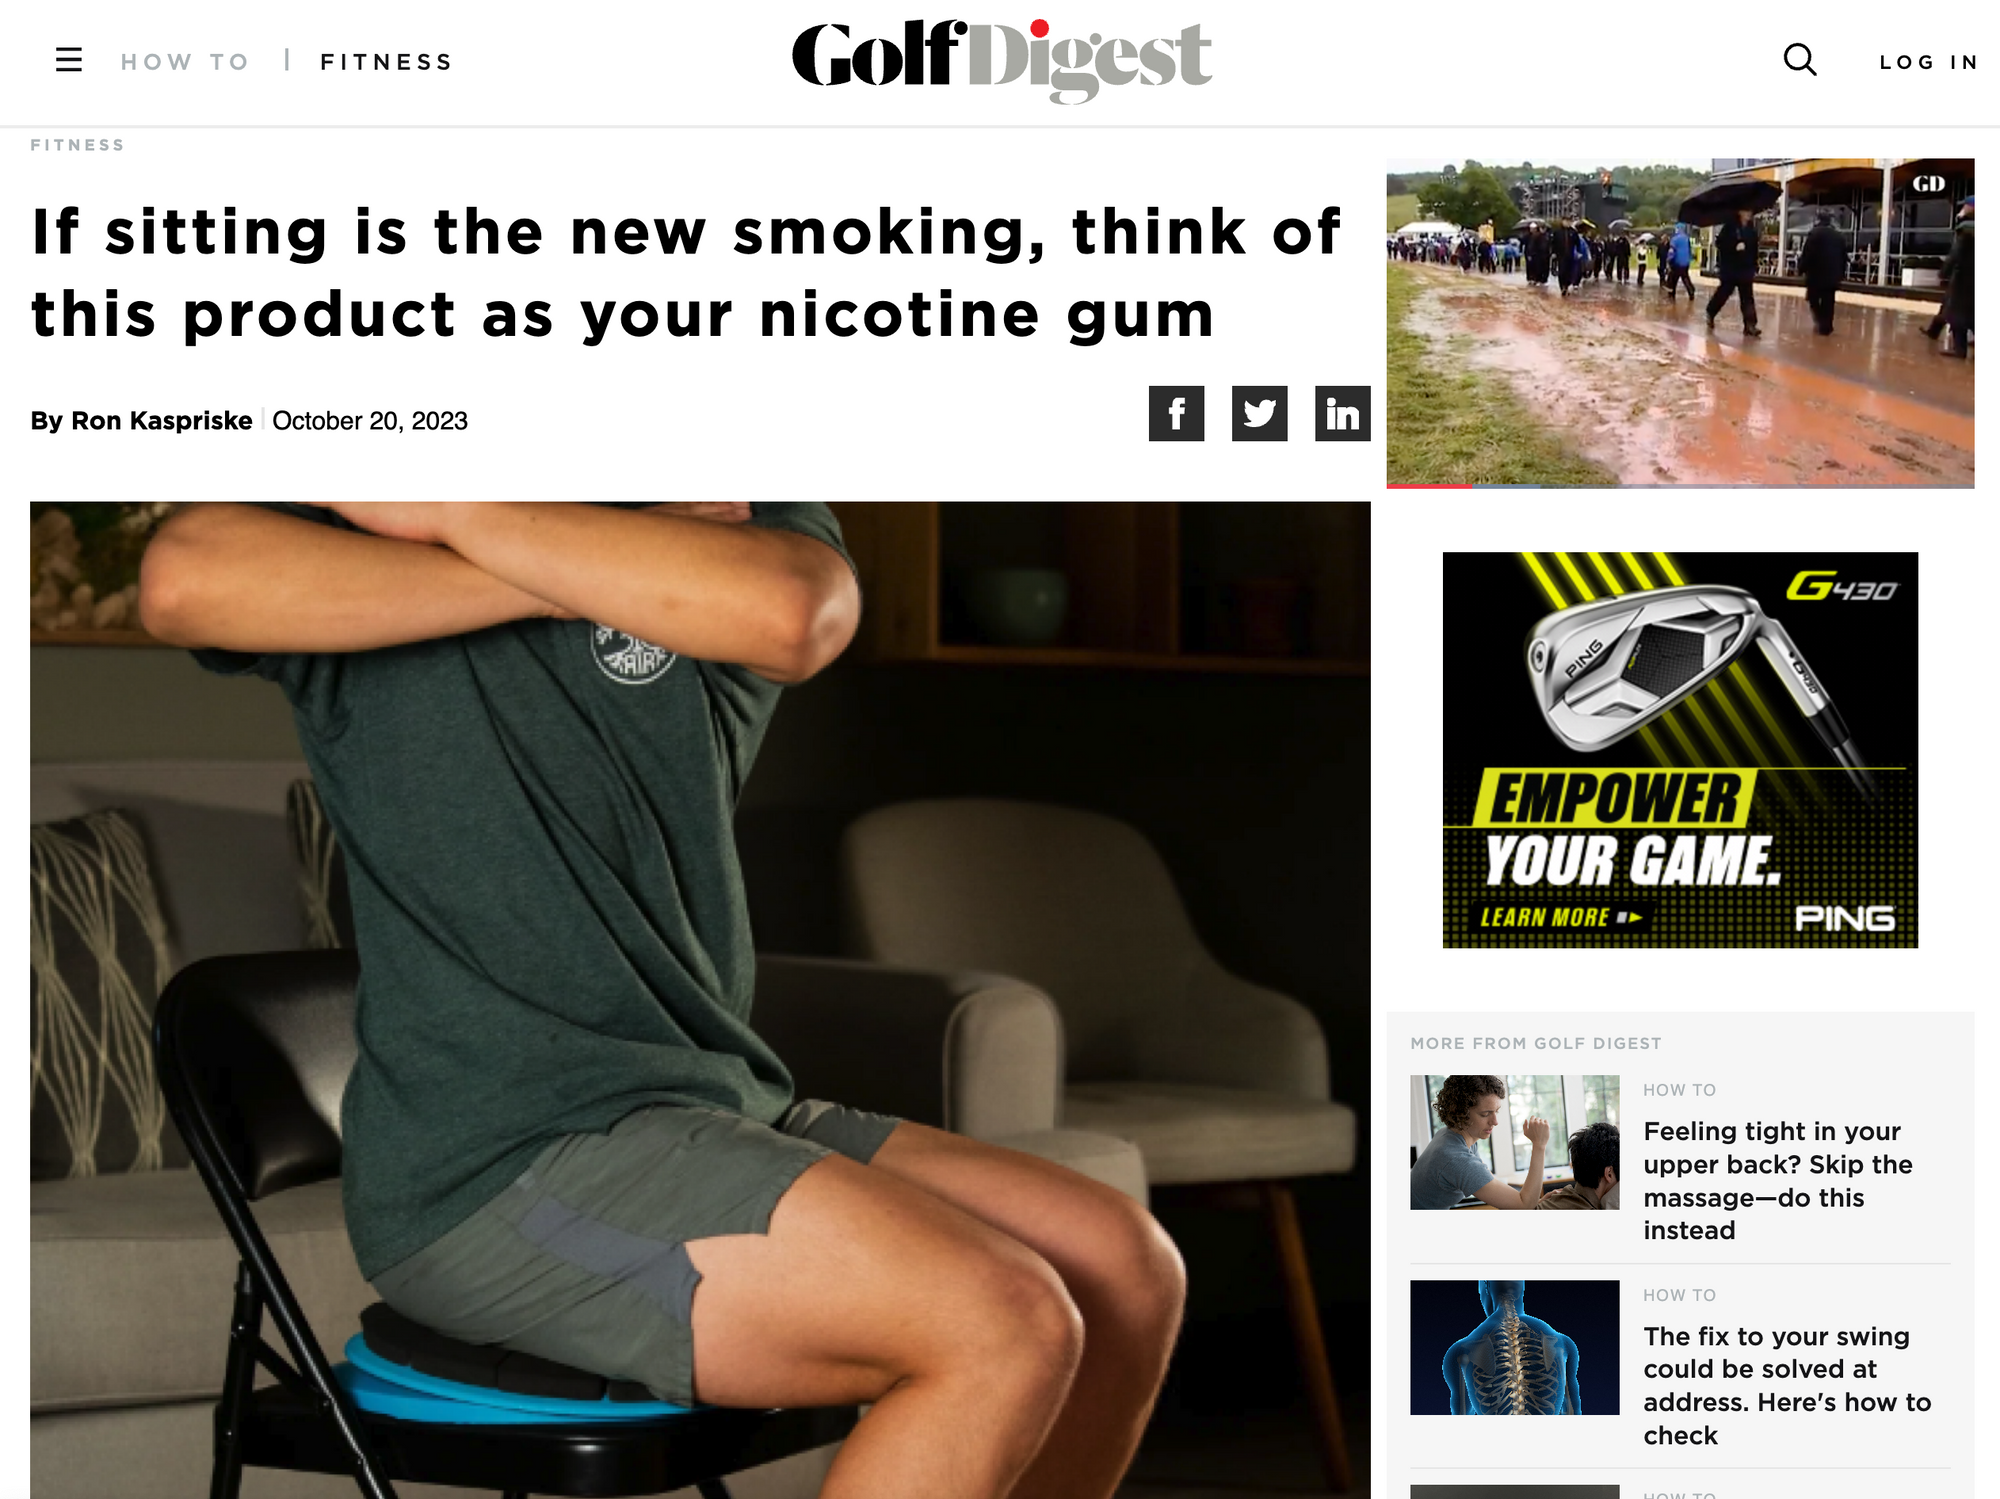 Golf Digest: If sitting is the new smoking, think of this product as your nicotine gum